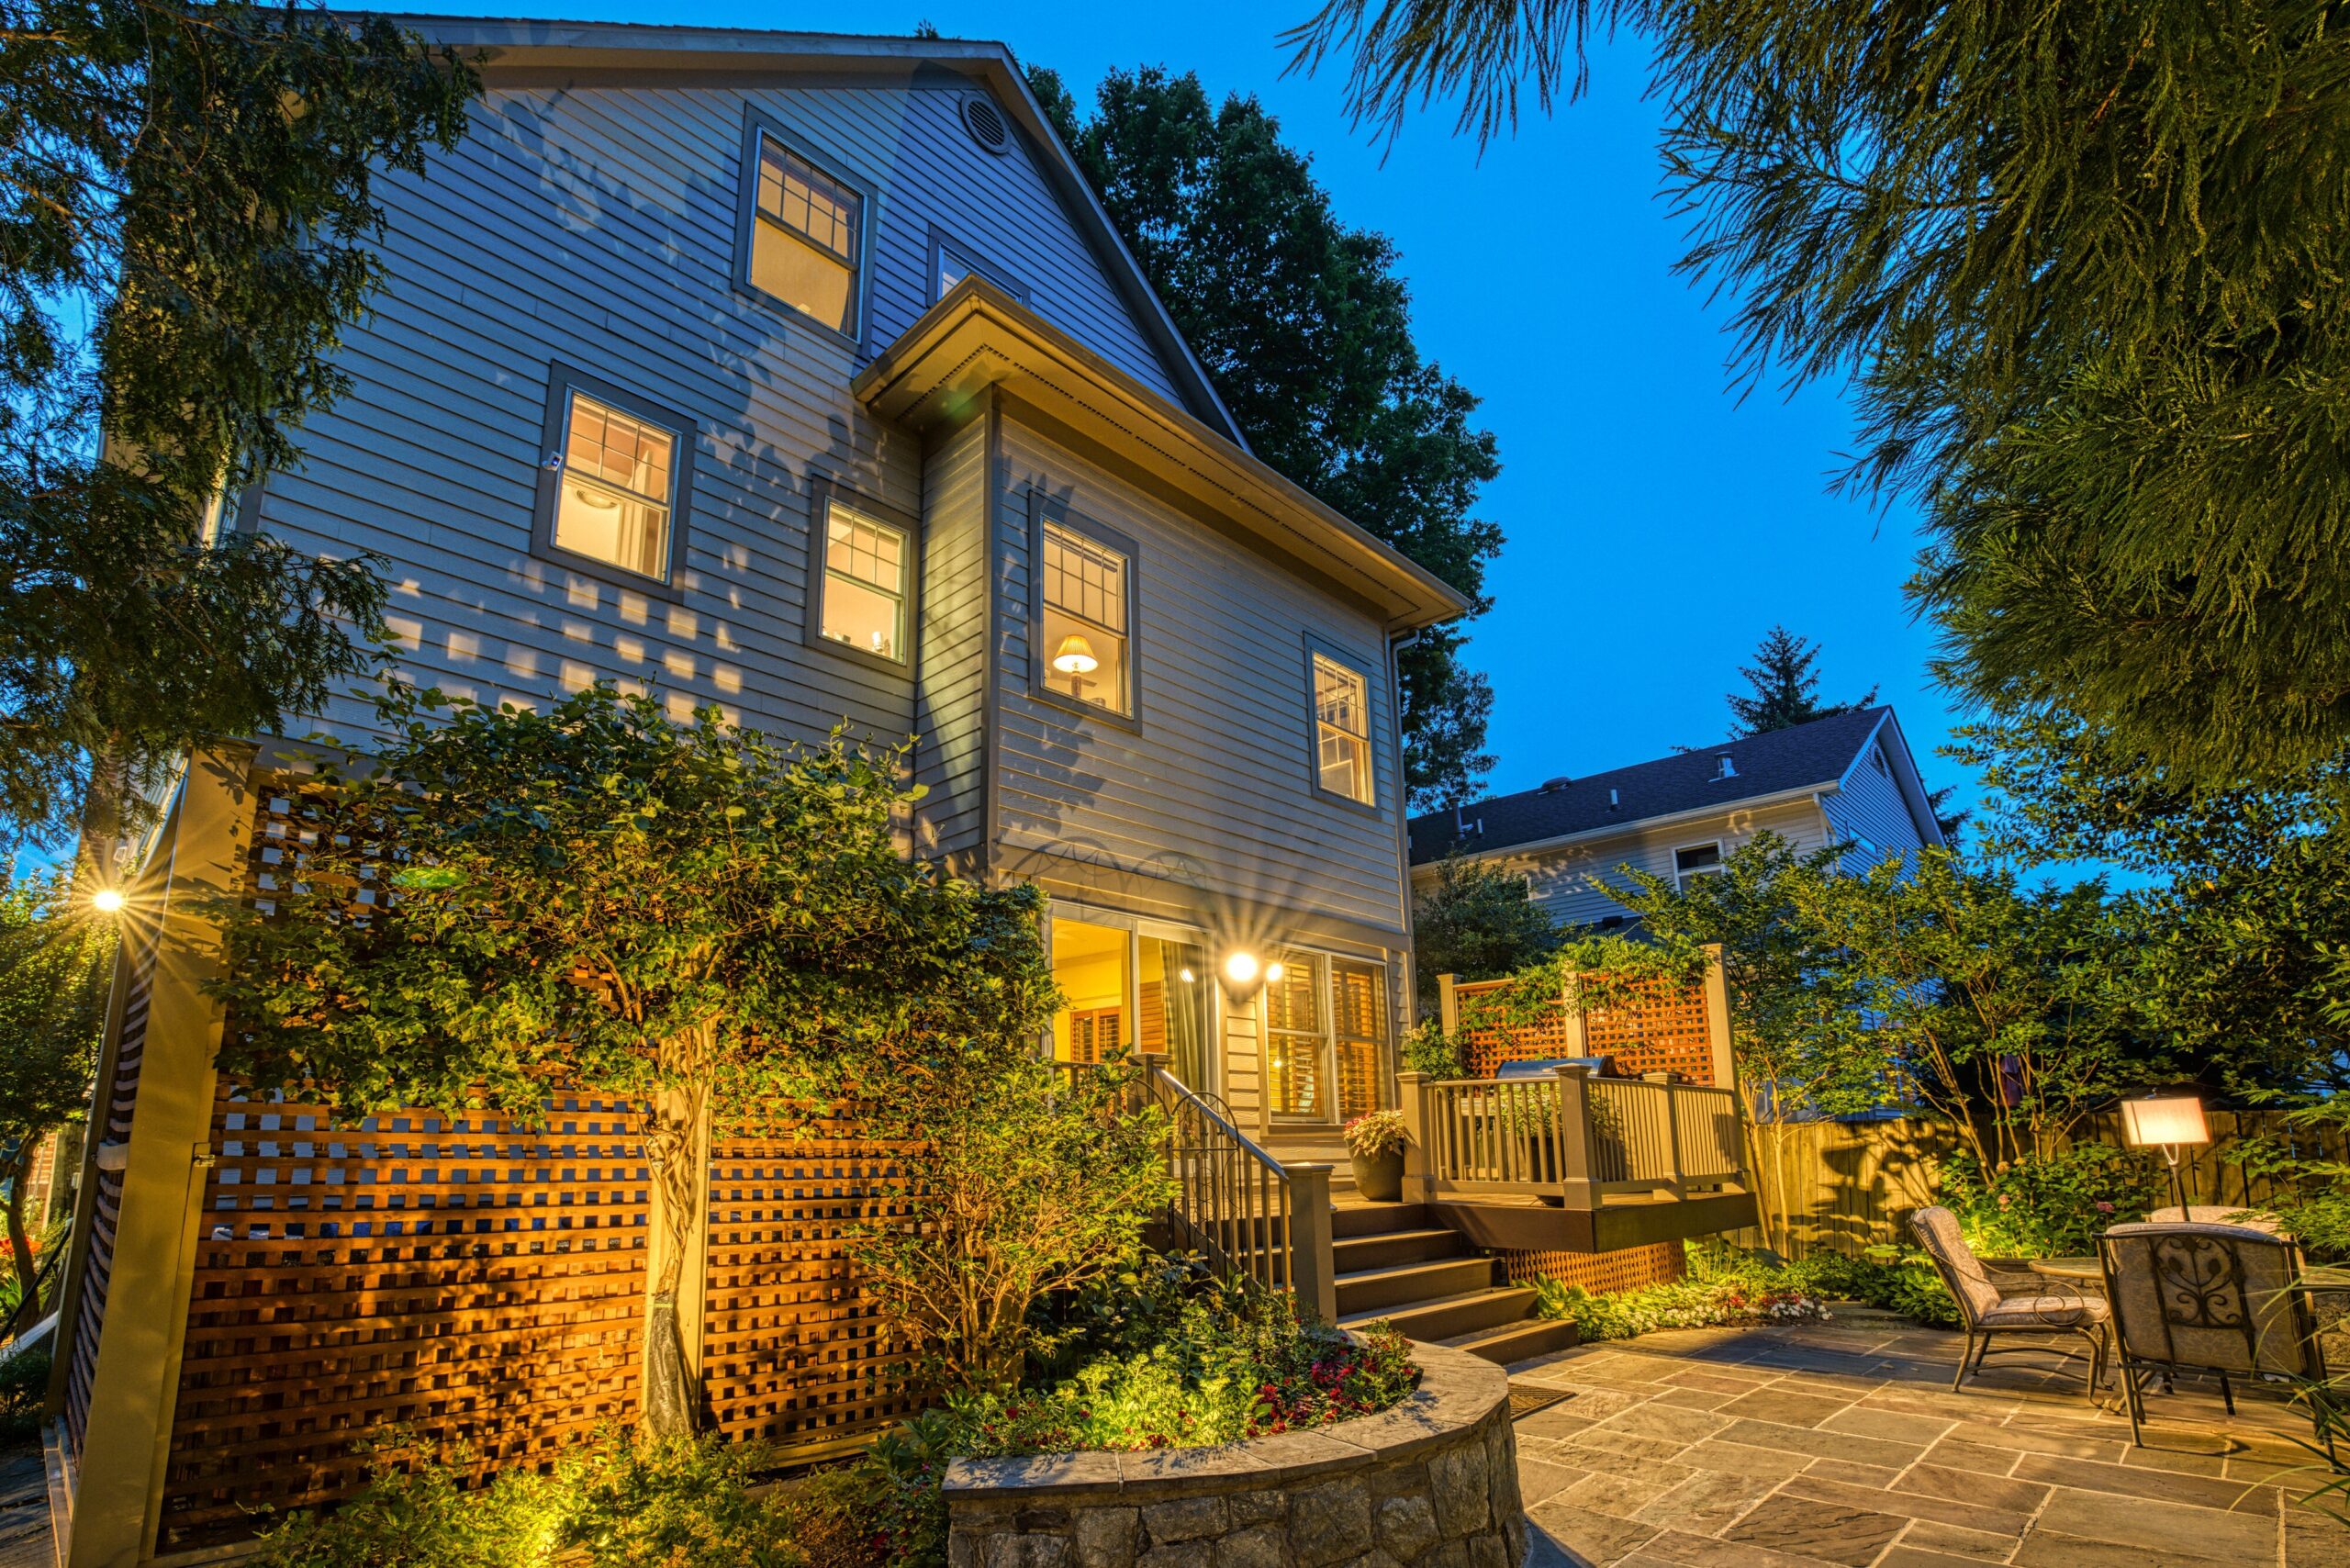 Professional exterior photo taken at dusk of 819 N Fillmore St - Showing the rear of the home looking back at the raised deck and along the flagstone patio